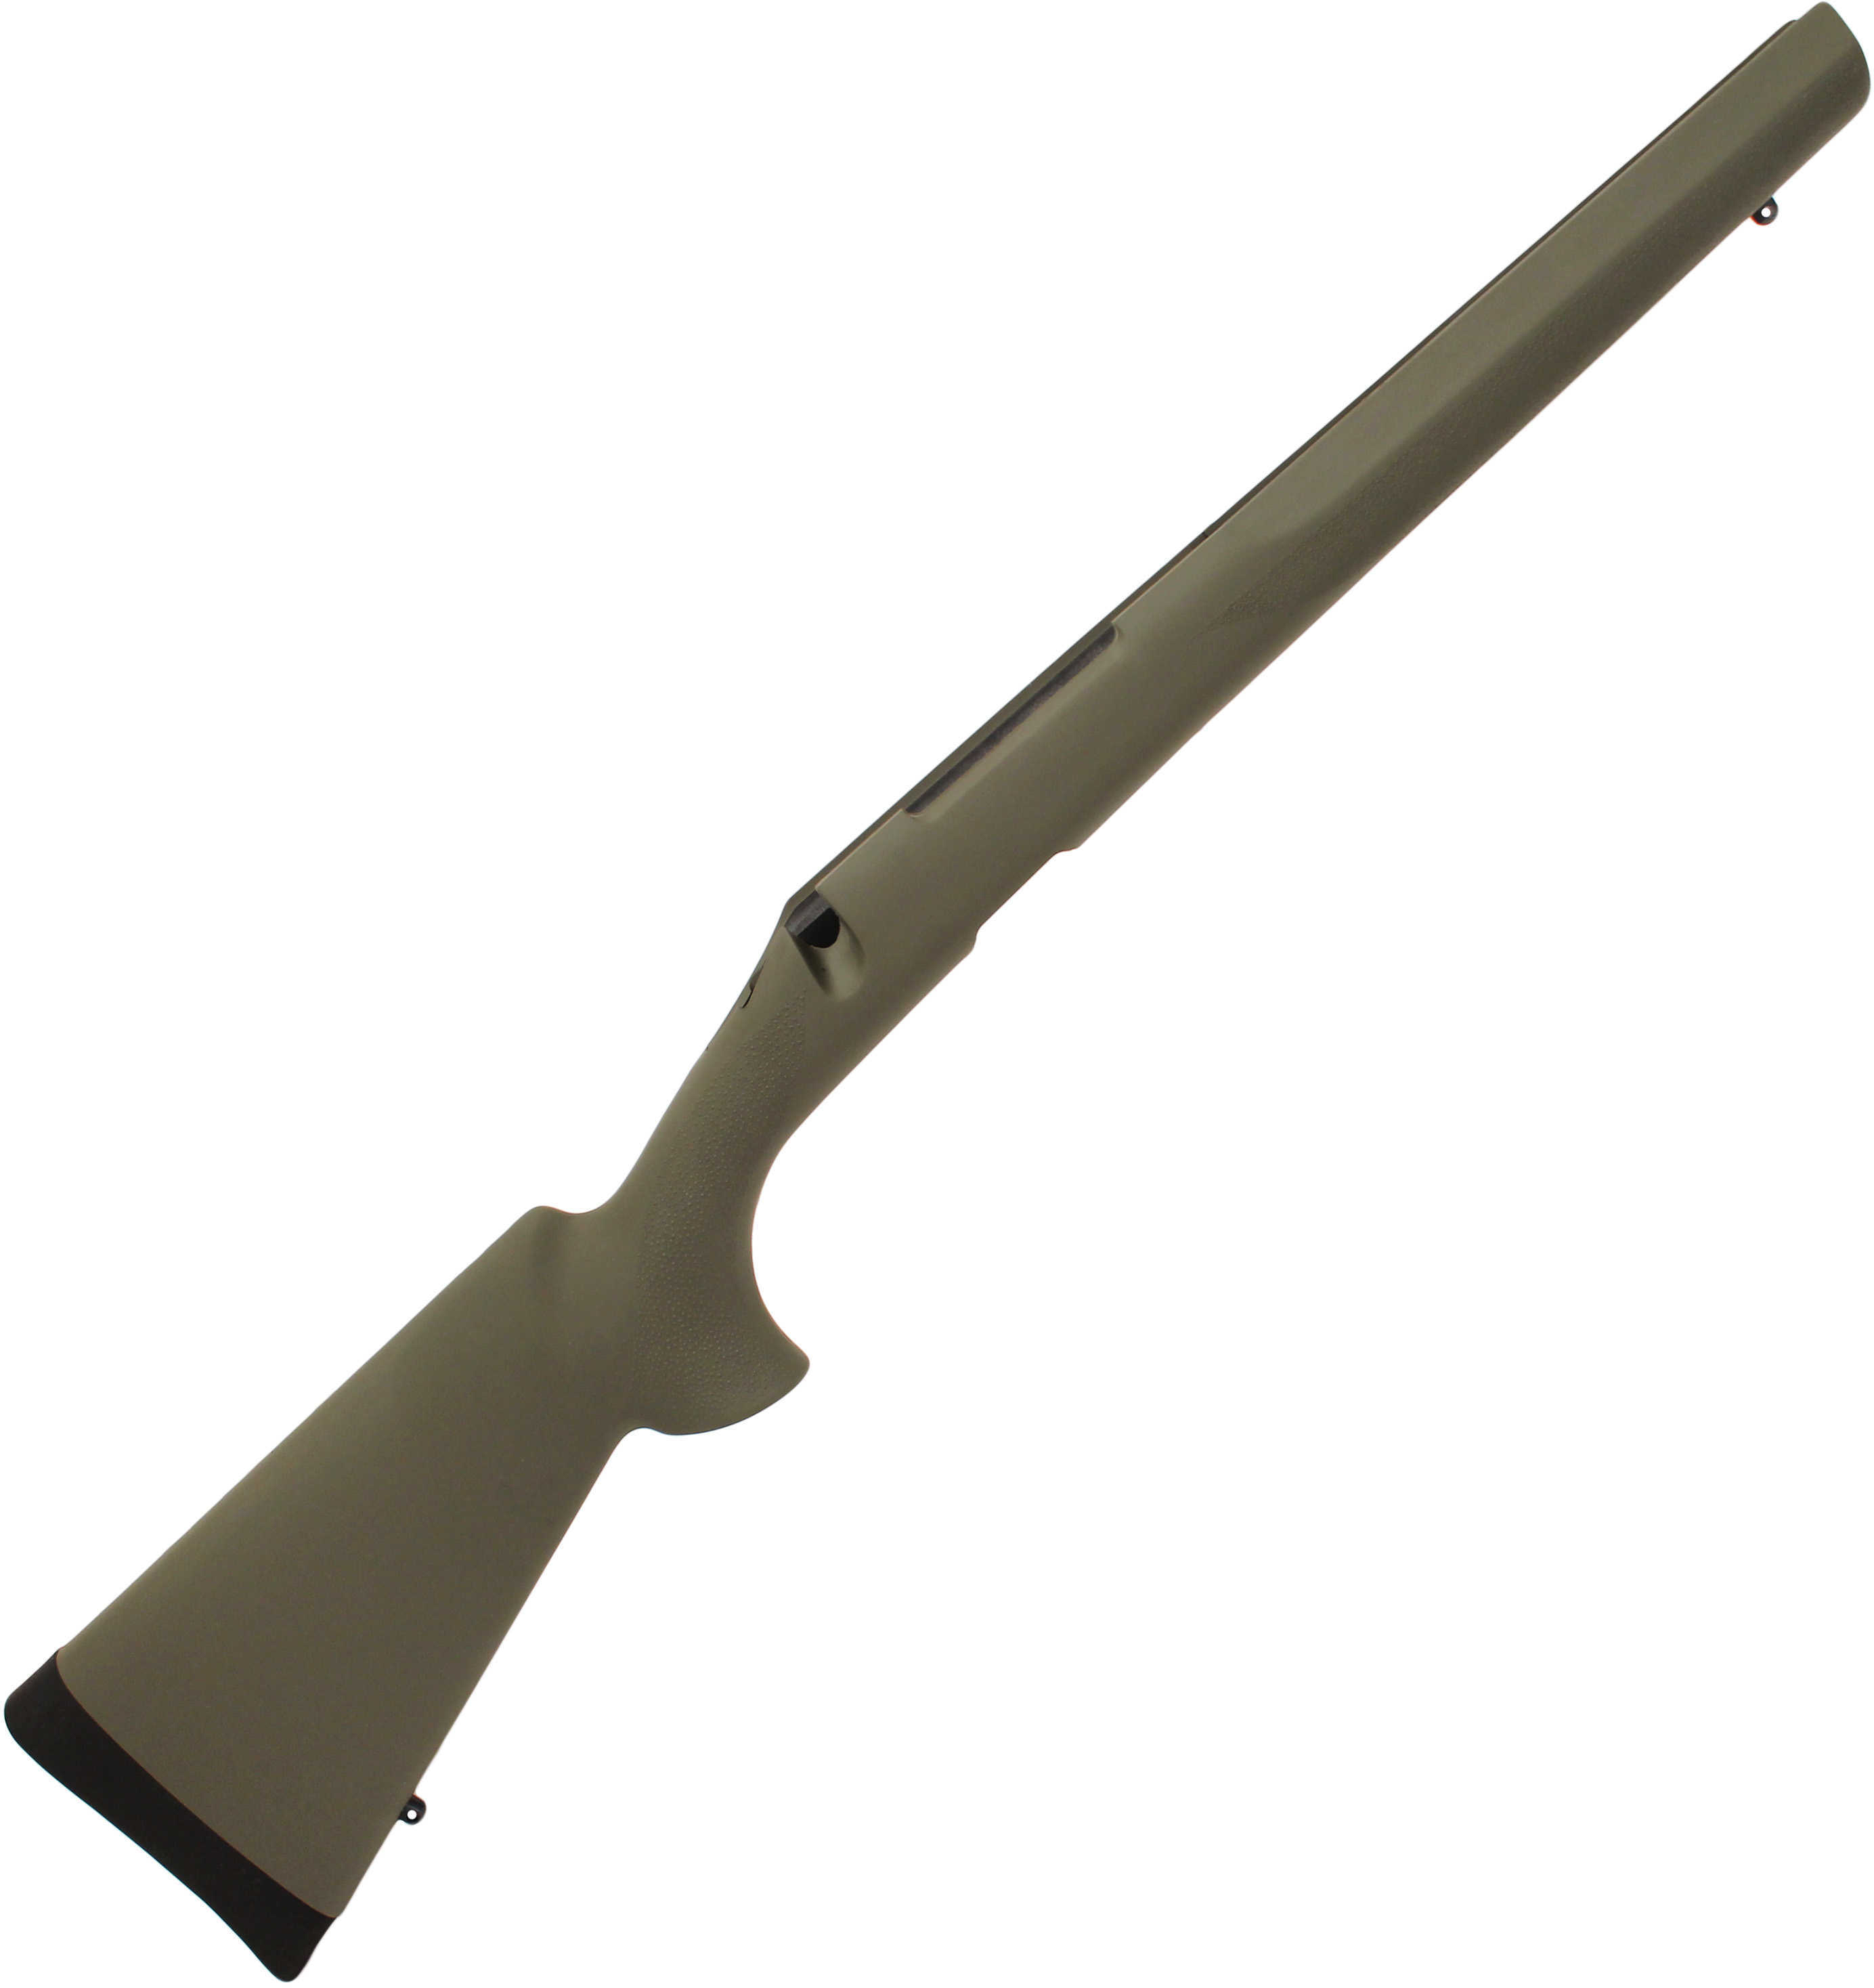 Hogue Remington 700 BDL Long Action Overmolded Stock Standard Barrel, Detachable Magazine, Pillarbed Olive Drab Green 70221